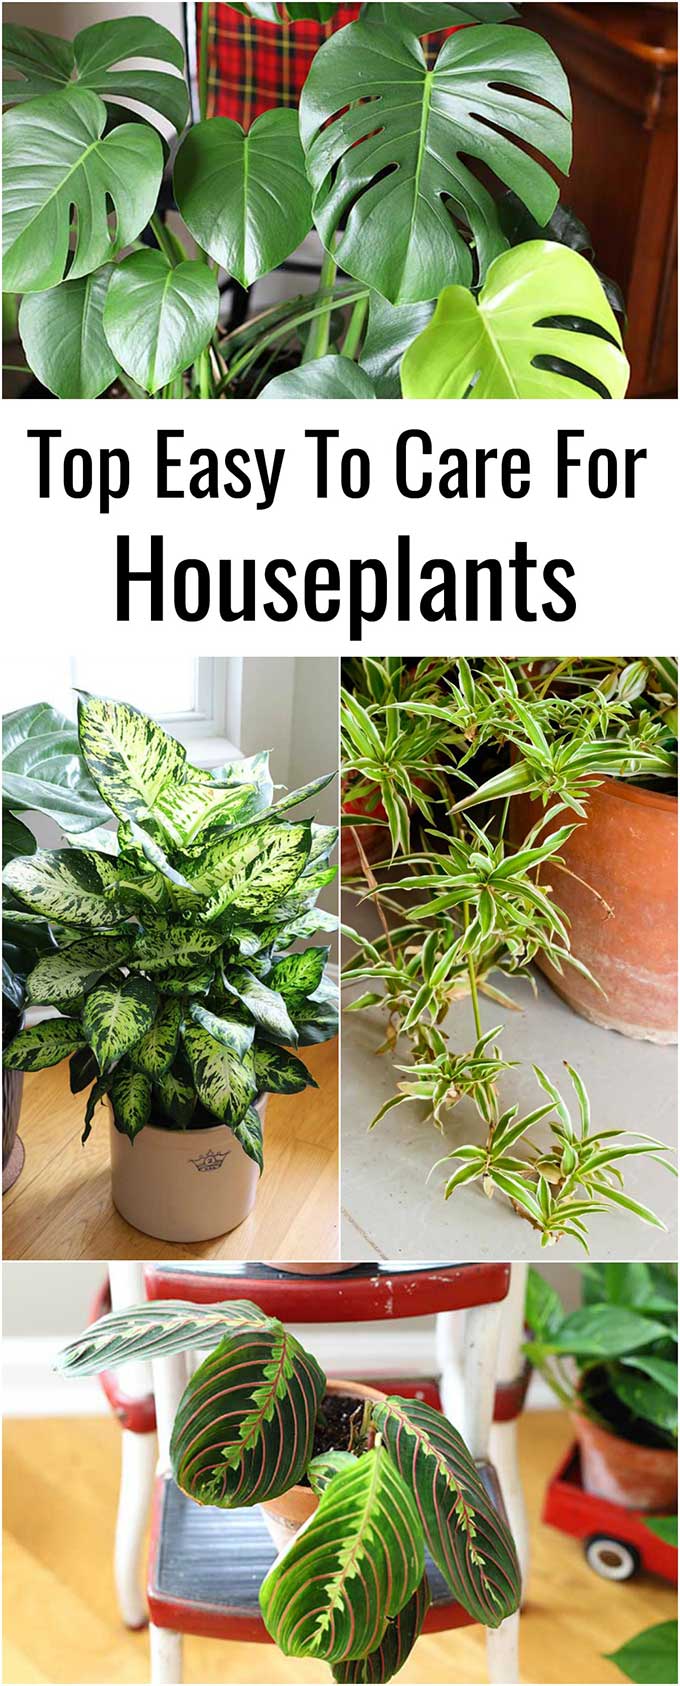 Easy to care for houseplants anyone can grow whether you have a green thumb or not! These plants are perfect for beginner gardeners!